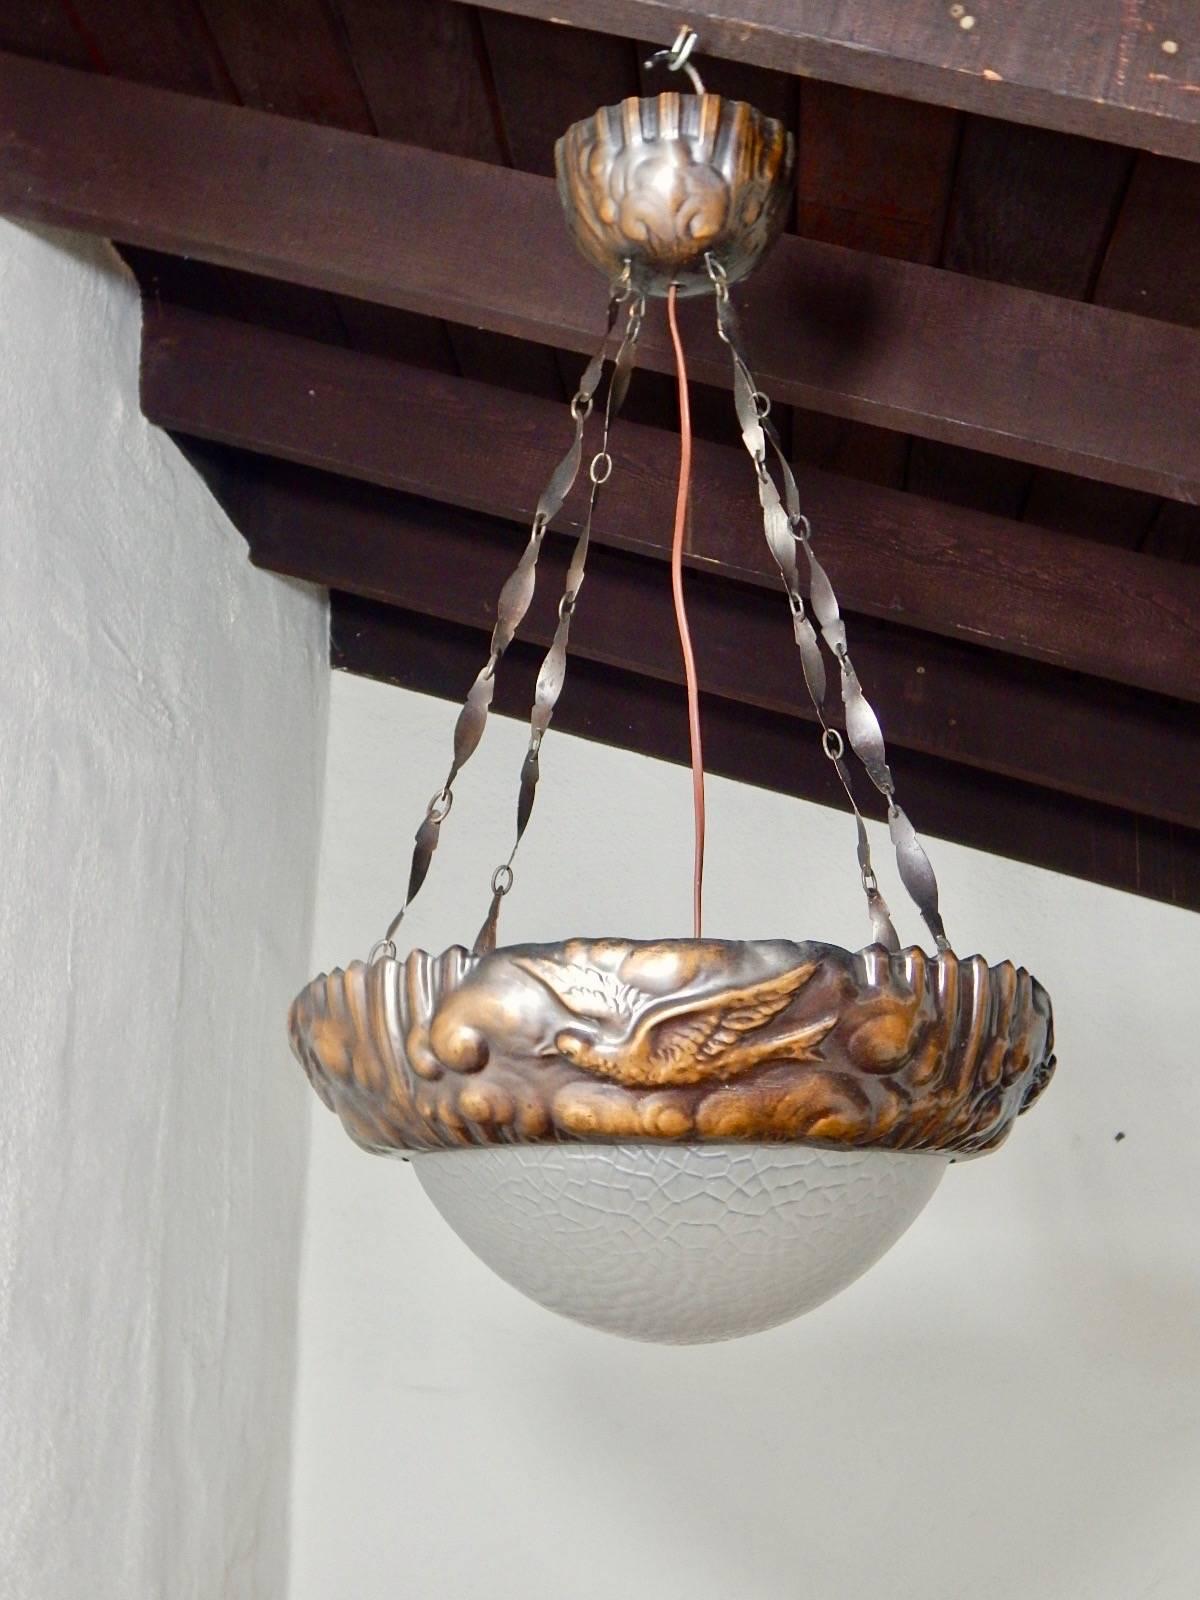 Swedish Arts & Crafts era hanging light fixture rendered in hand-hammered copper. 
With hammered motifs of fires and clouds. Glass bowl is original. There is one electrical socket which illuminates the center of the bowl. Price included complete